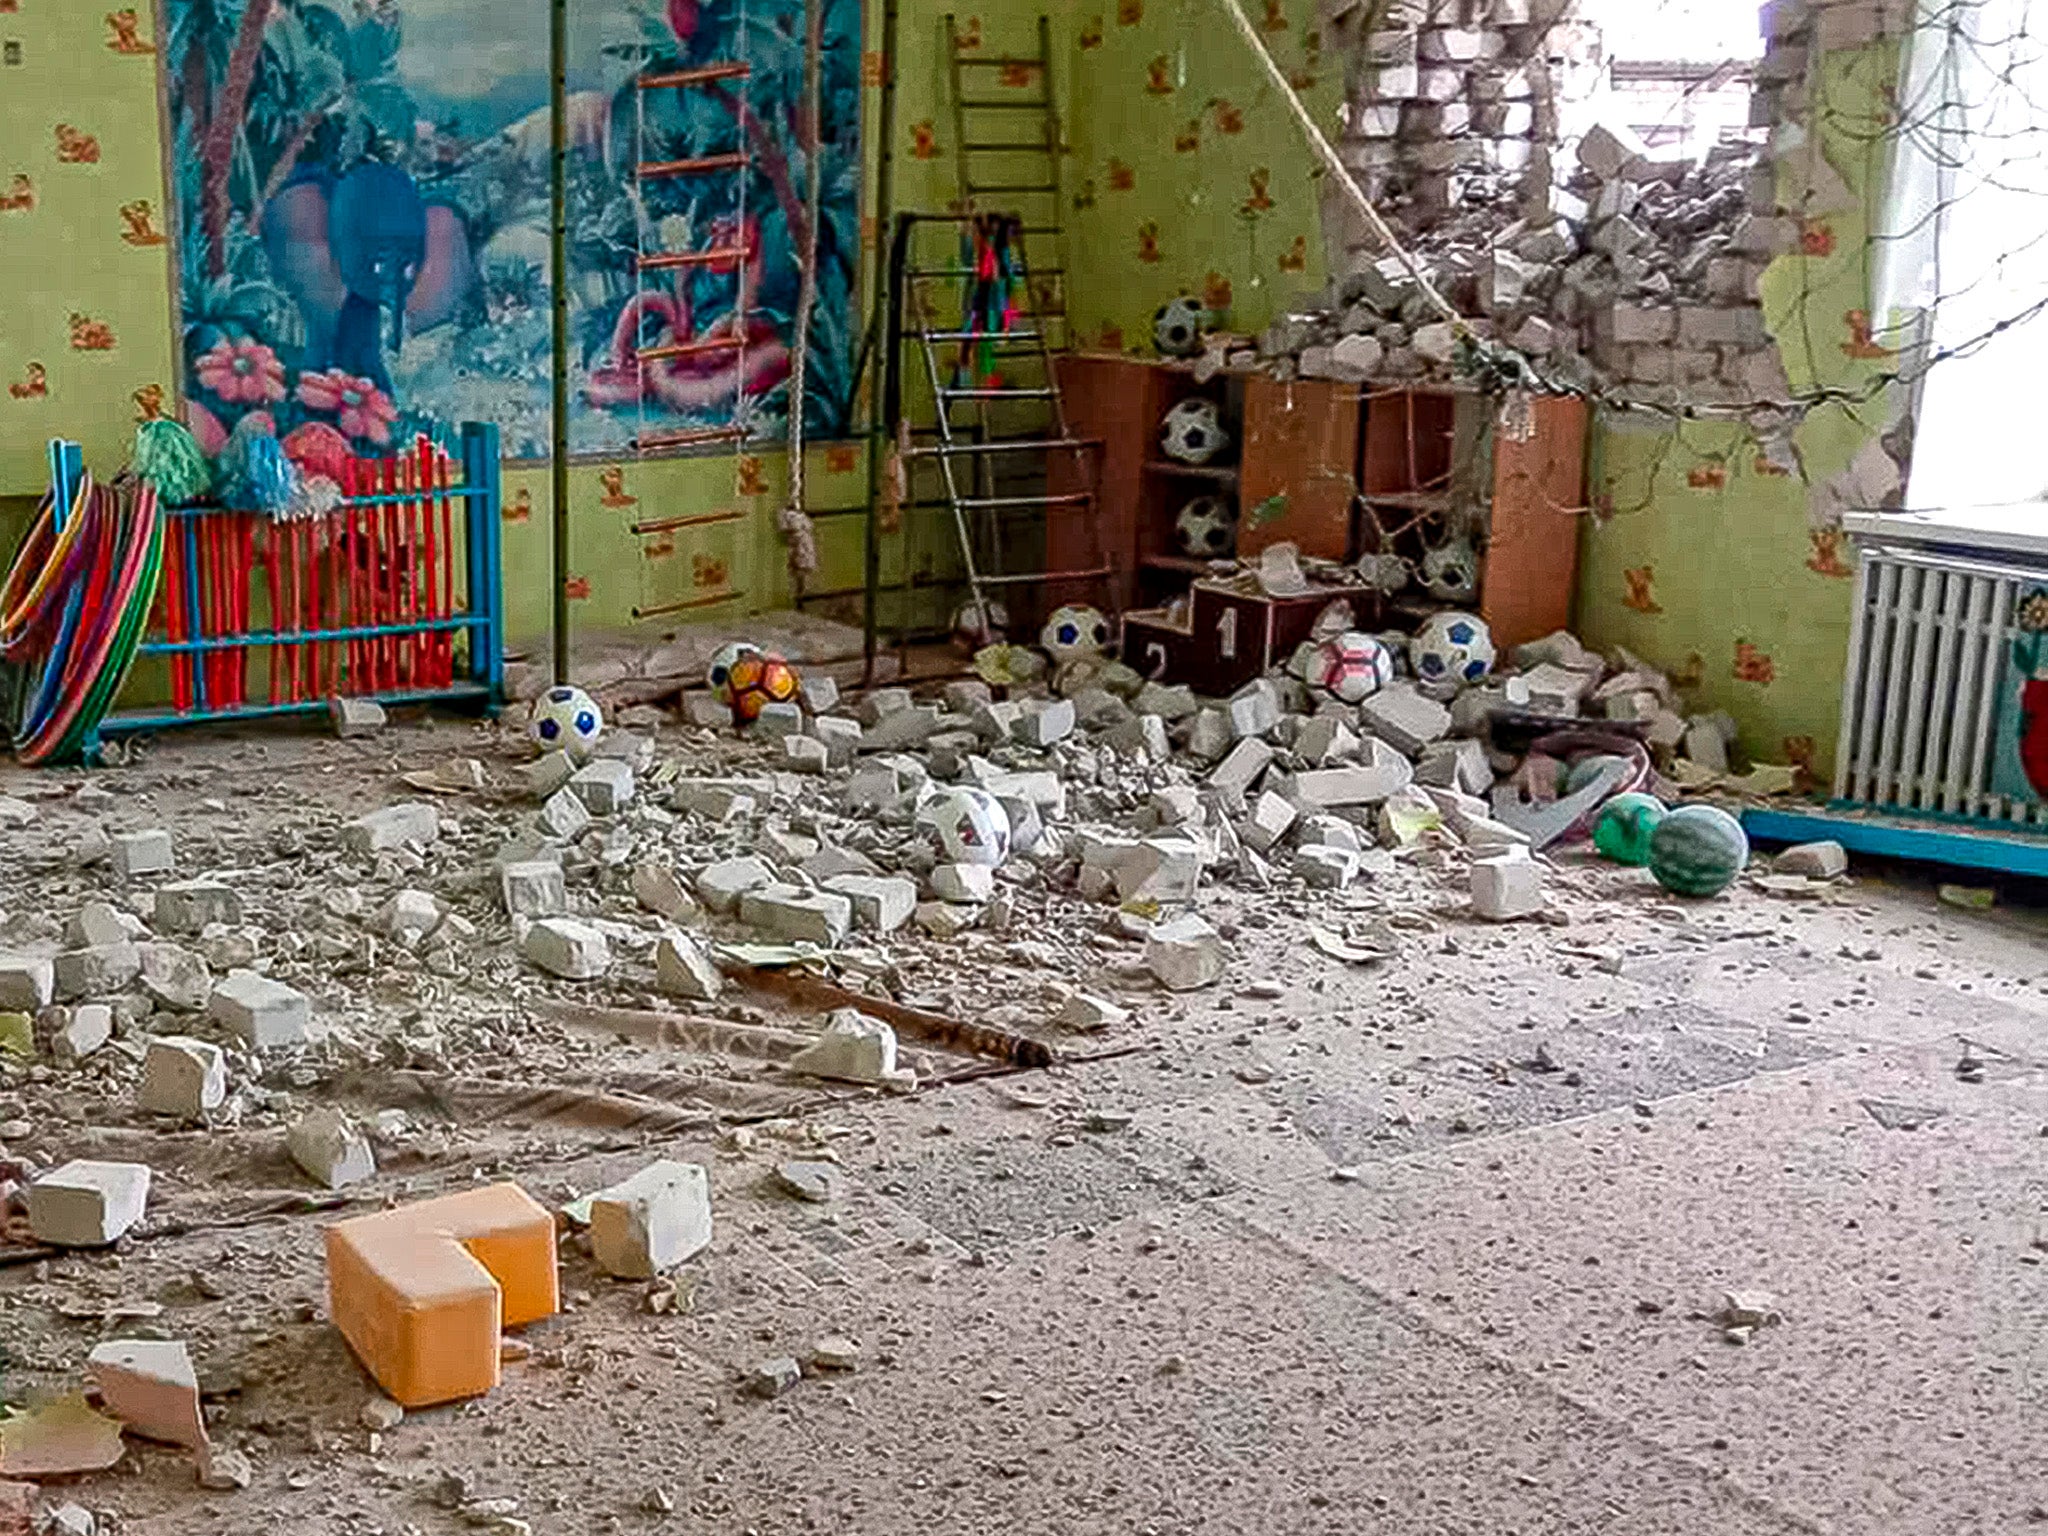 This handout photo, released by Ukrainian Joint Forces Operation, shows a view of a kindergarten building after alleged shelling by separatists forces in Stanytsia Luhanska, eastern Ukraine, on Thursday